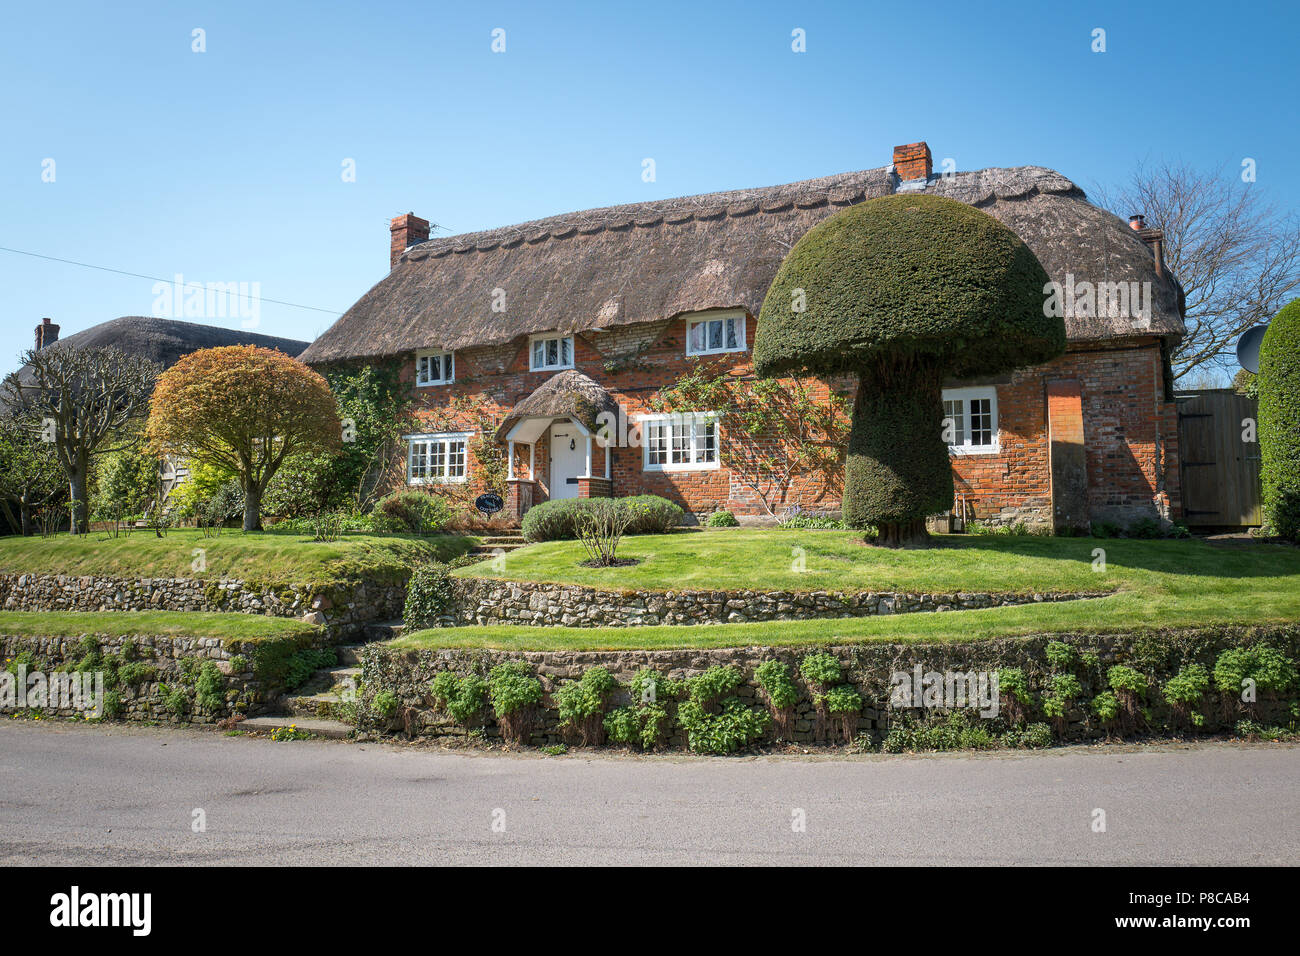 Thatched Peacock Cottage in Wansborough Wiltshire England UK with an impressive yew topiary Stock Photo